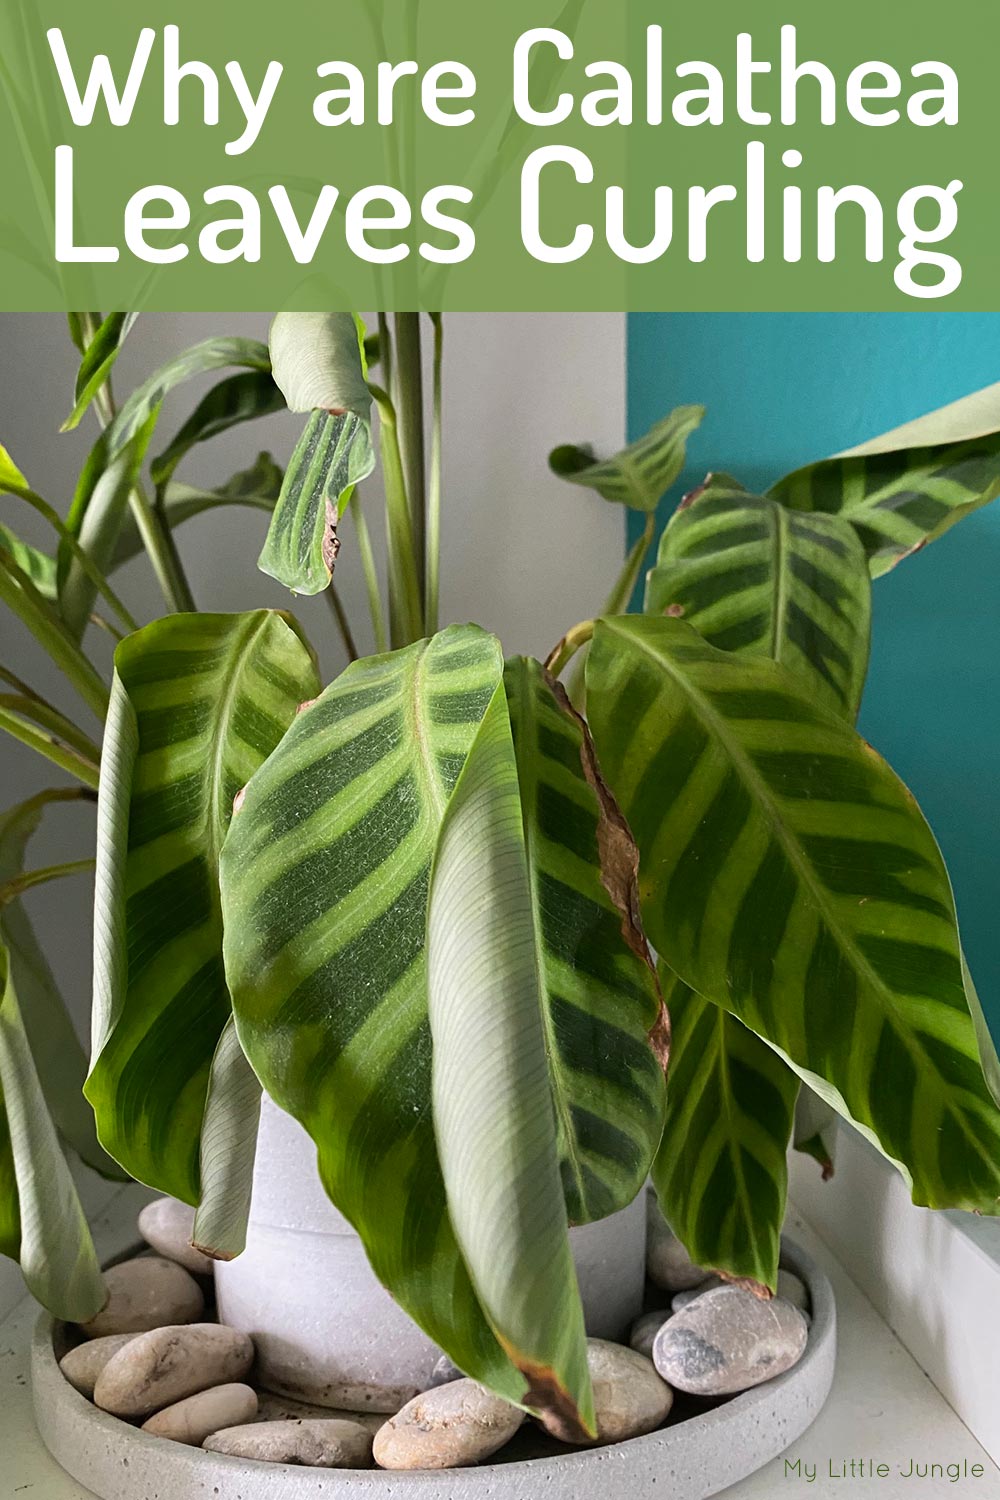 Why are Your Calathea Leaves Curling?